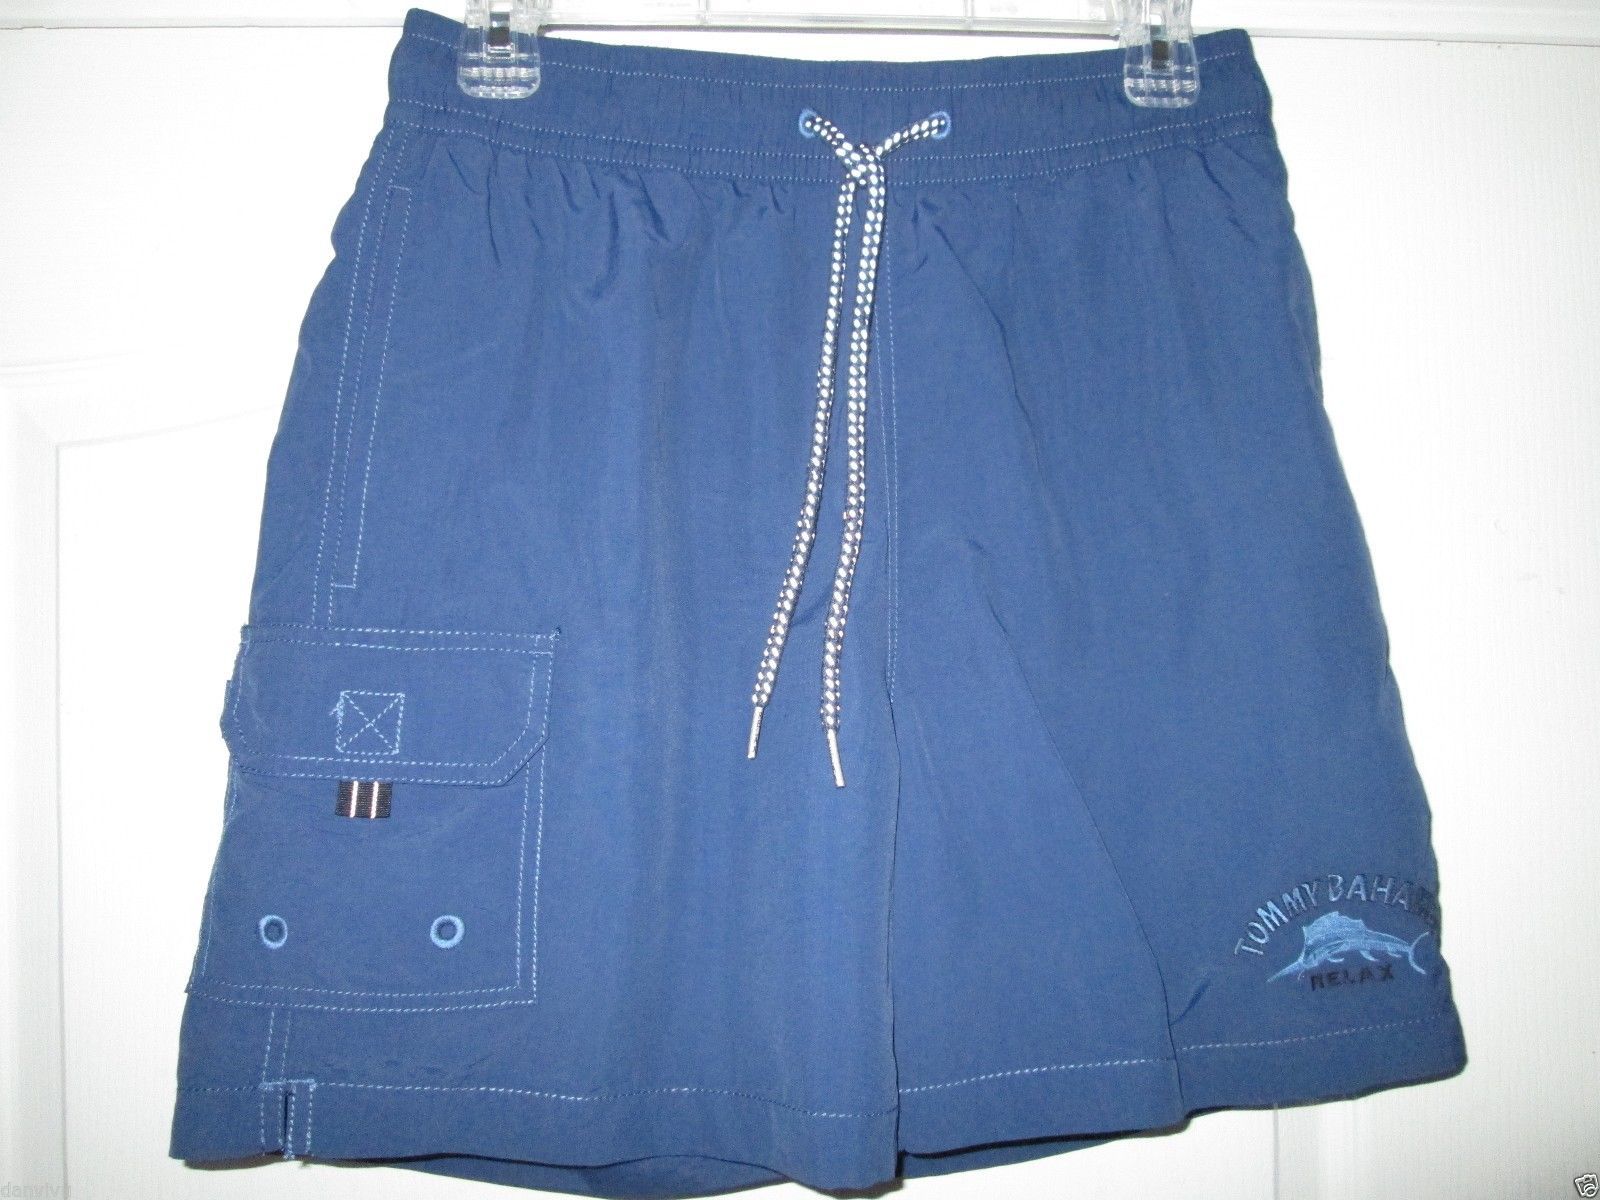 Tommy Bahama TR924 Relax-Fit Solid Men’s Board Shorts Darkblue, Navy S (28-30) - $35.88